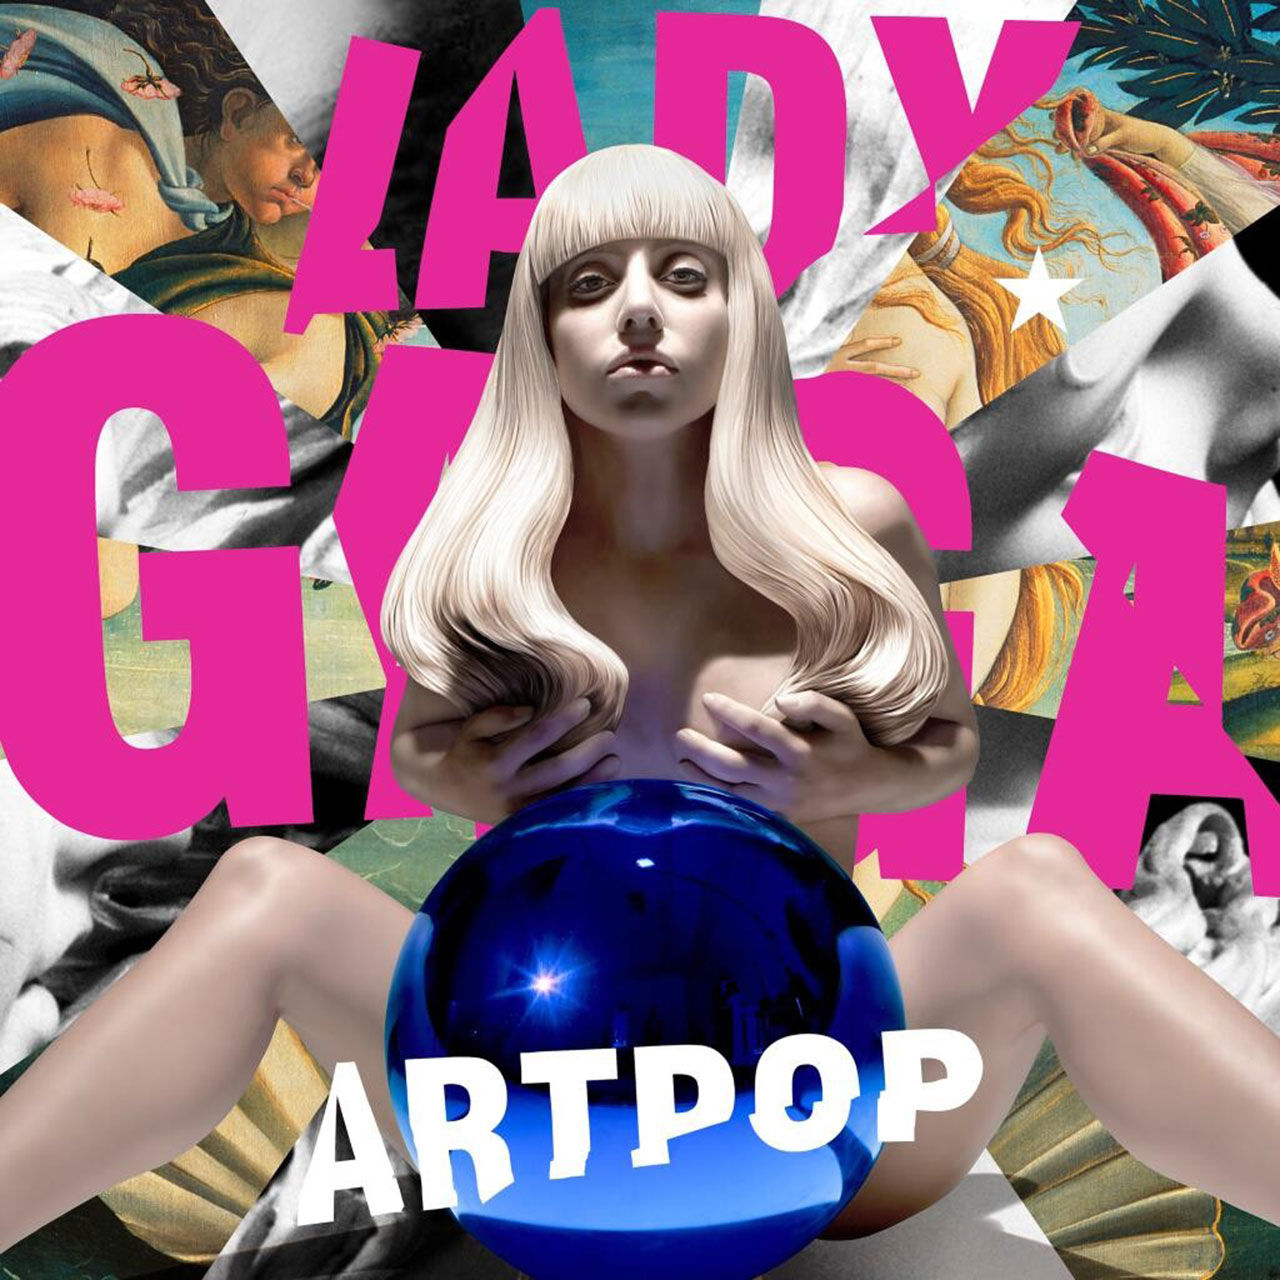 News Added Aug 06, 2012 Lady Gaga has revealed the title of her upcoming album to be ARTPOP, and she has requested that "Make sure when writing about my new album/project ARTPOP that you CAPITALIZE the title it's all in the details." The album title has made it to the singers arm in form of […]